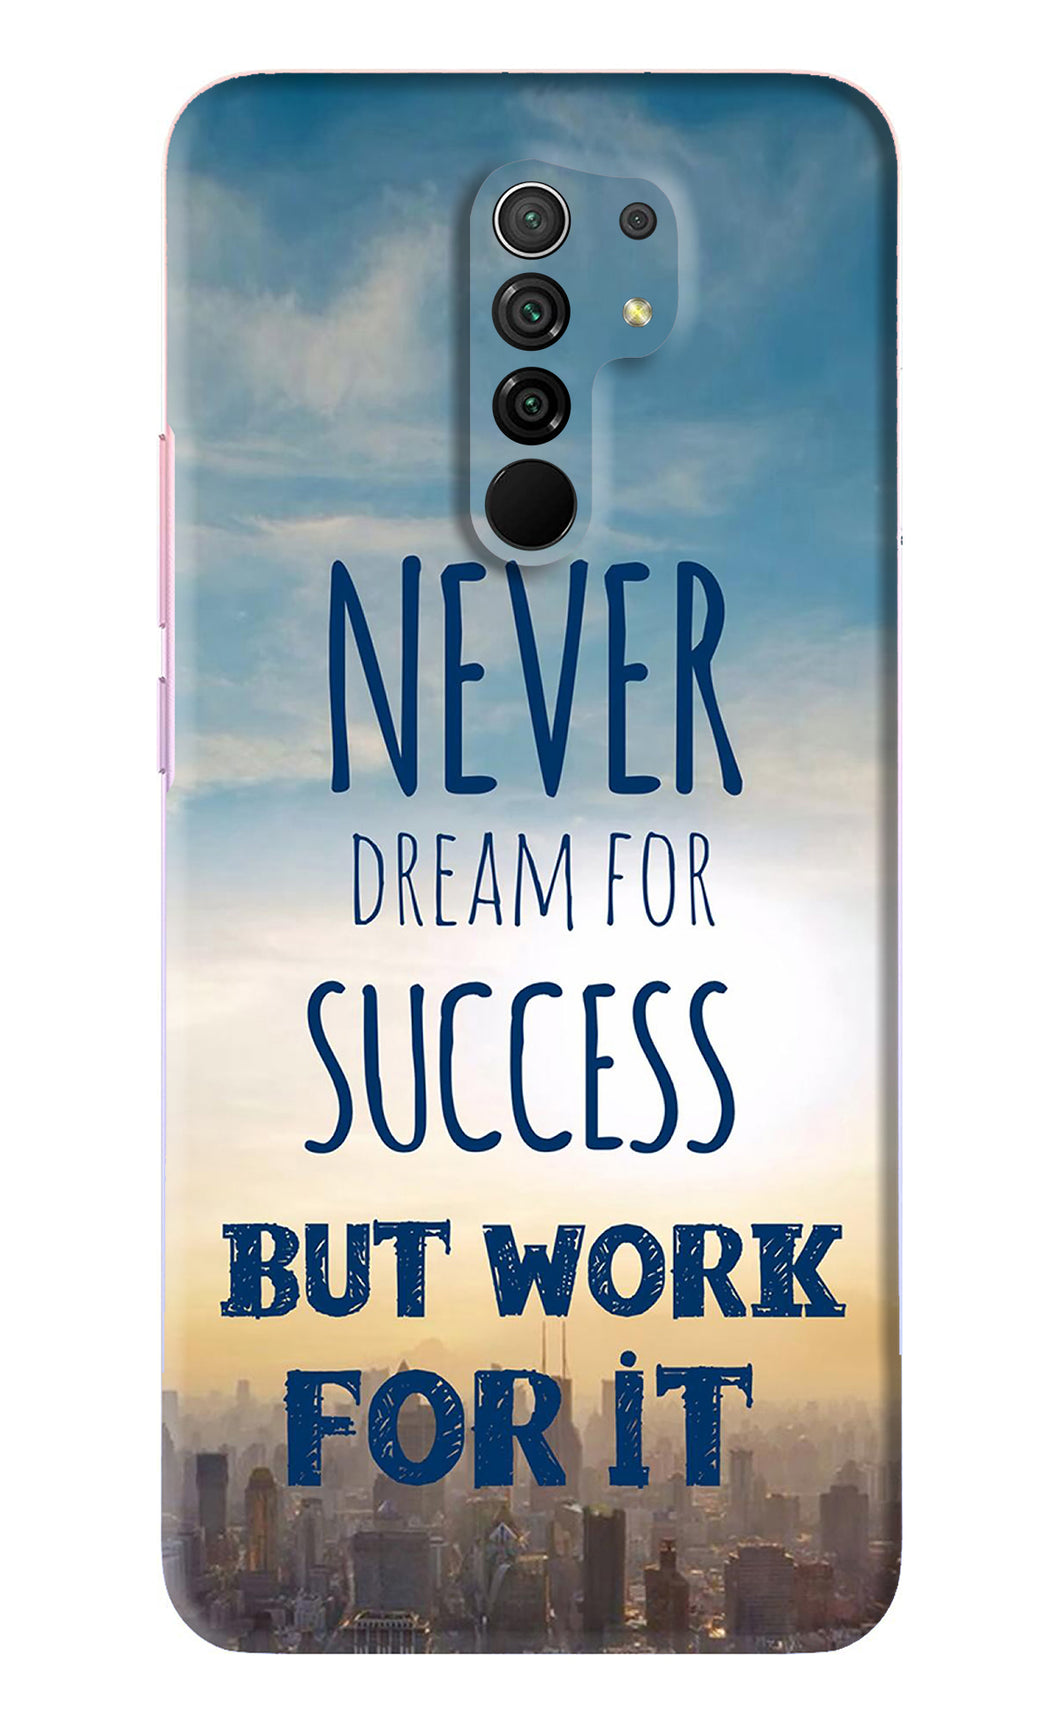 Never Dream For Success But Work For It Xiaomi Redmi 9 Prime Back Skin Wrap